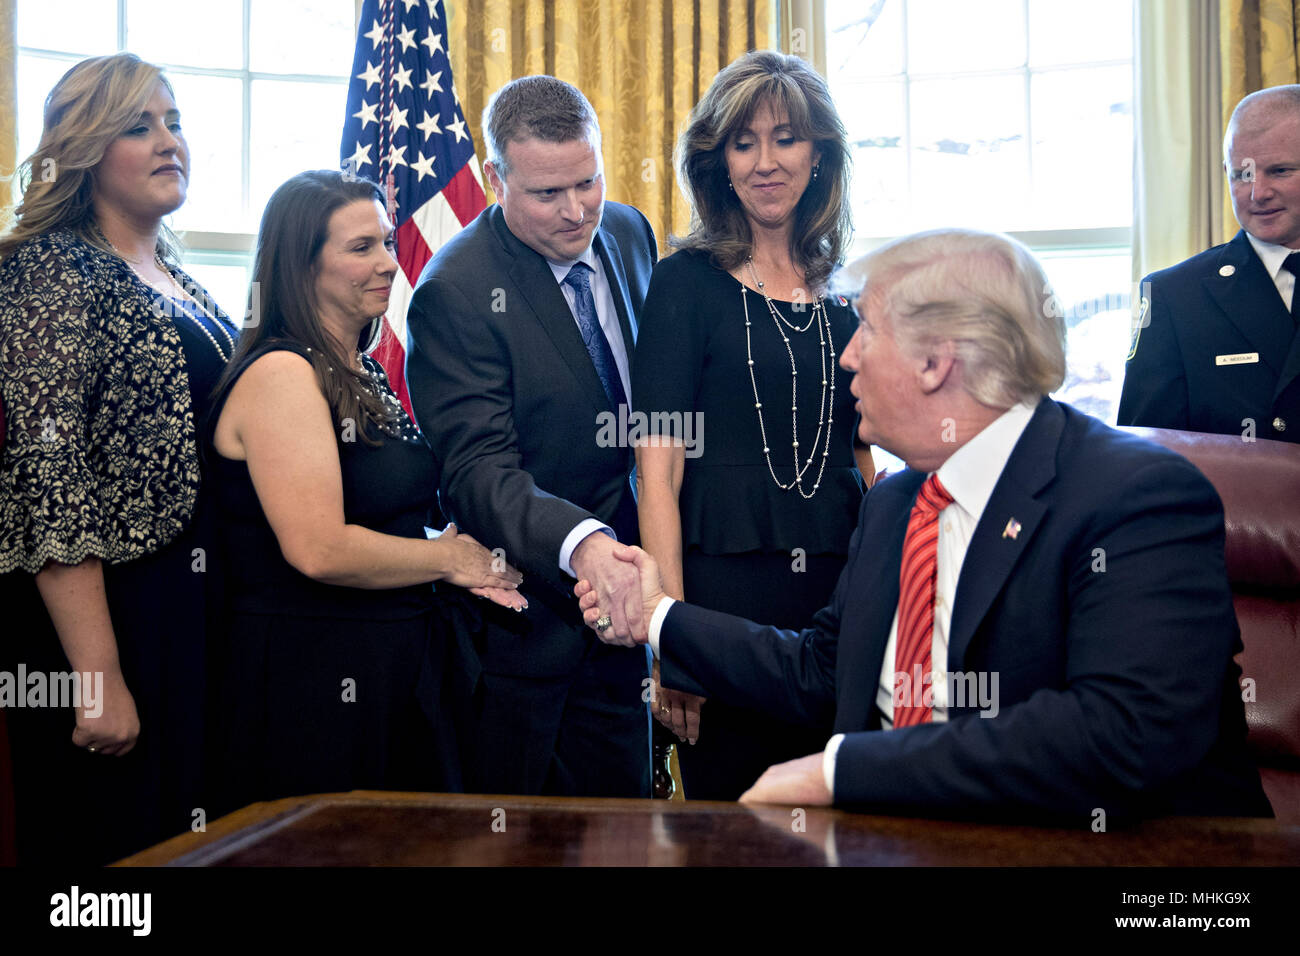 United States President Donald Trump, right, shakes hands with Darren Ellisor, a Southwest Airlines Co. first officer, next to Tammie Jo Shults, a Southwest Airlines captain, center, while meeting with the crew and passengers of Southwest Airlines flight 1380 in the Oval Office of the White House in Washington, DC, U.S., on Tuesday, May 1, 2018. An engine on Southwest's flight 1380, a Boeing Co. 737-700 bound for Dallas from New York's LaGuardia airport, exploded and made an emergency landing on April 17 sending shrapnel into the plane and killing a passenger seated near a window. Credit: A Stock Photo